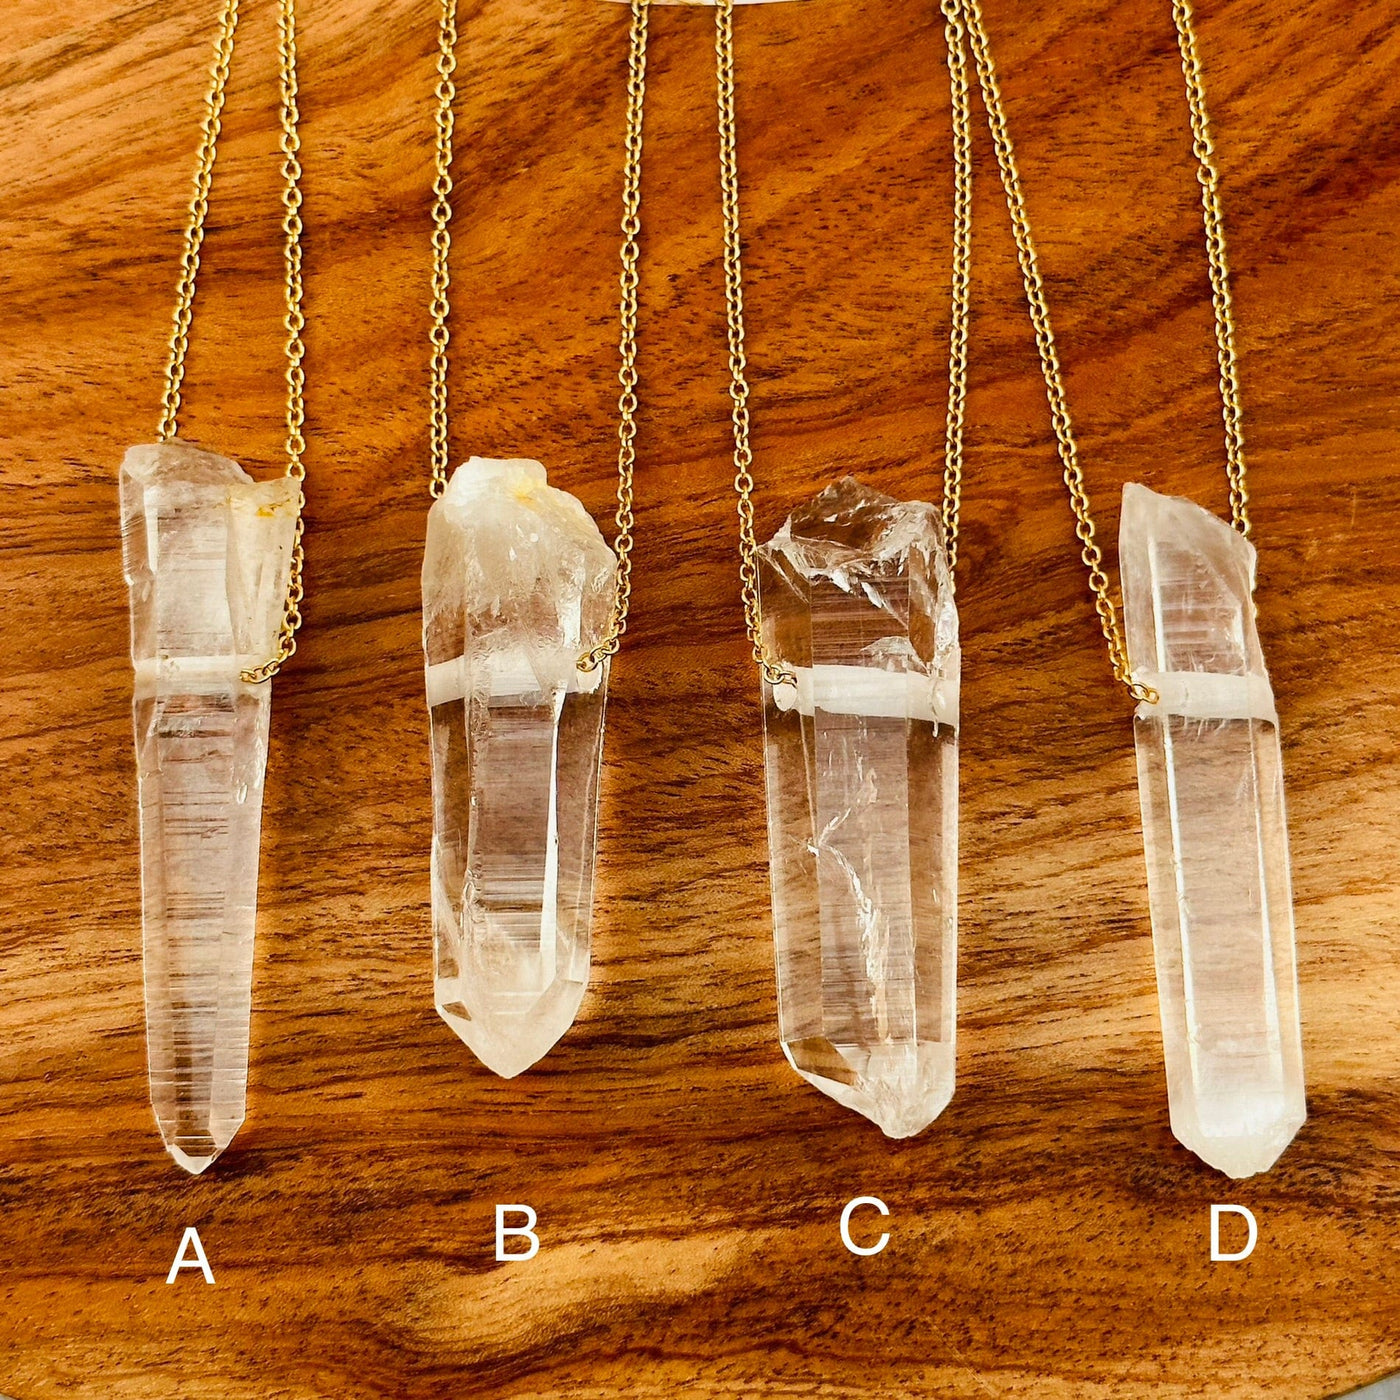 Columbian Lemurian Point Crystal Necklace - you select your favorite one